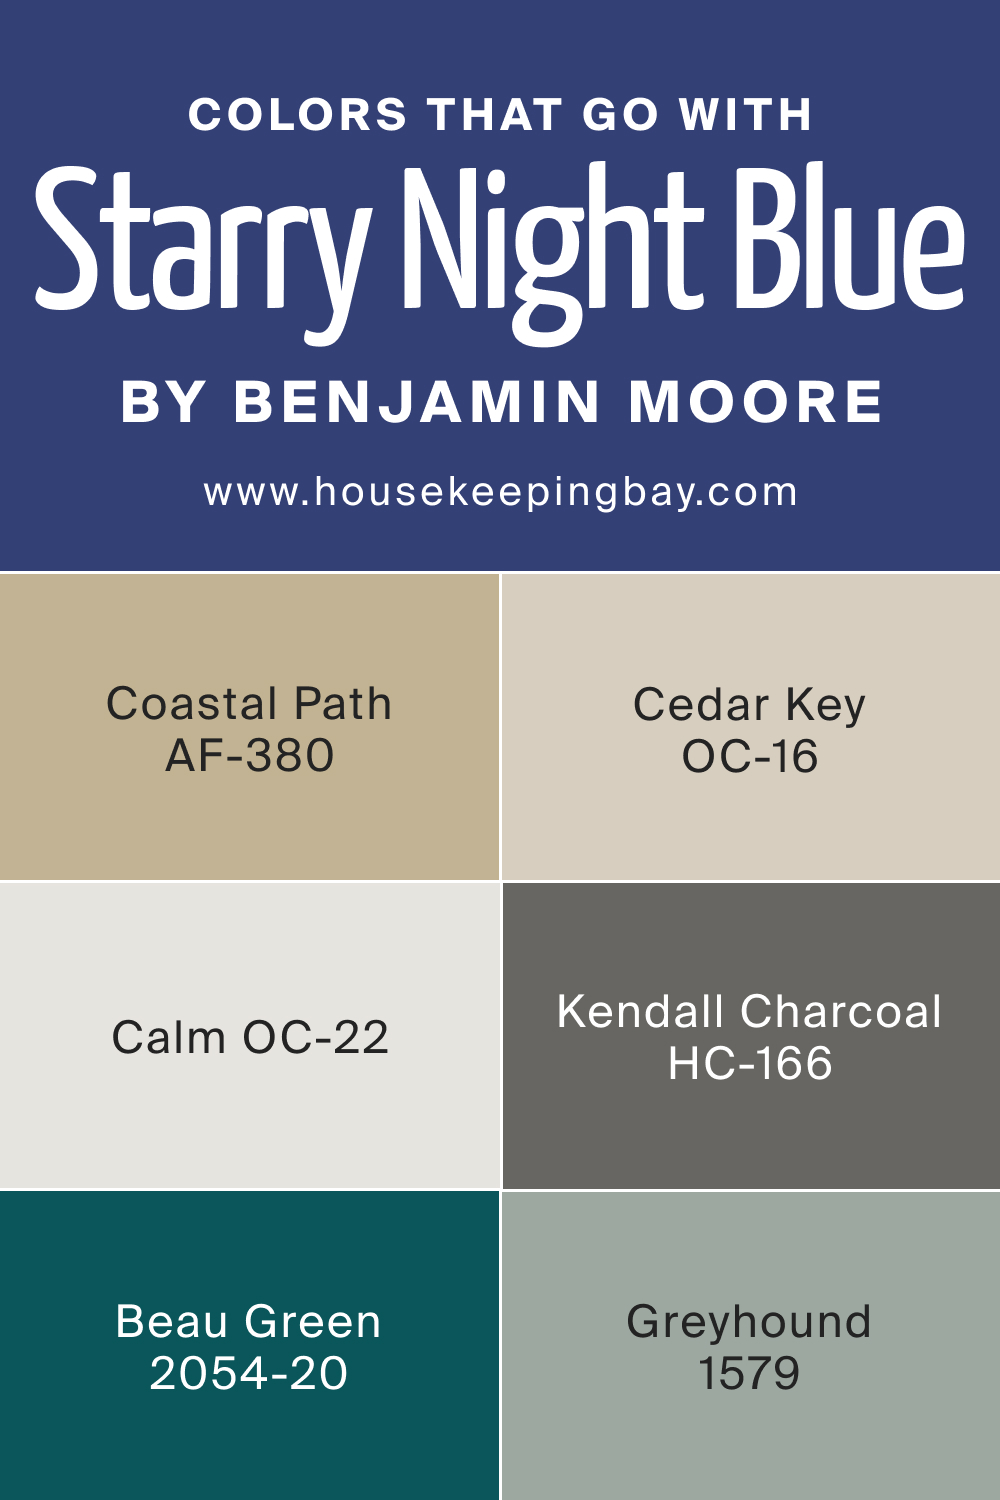 Colors that goes with Starry Night Blue 2067 20 by Benjamin Moore